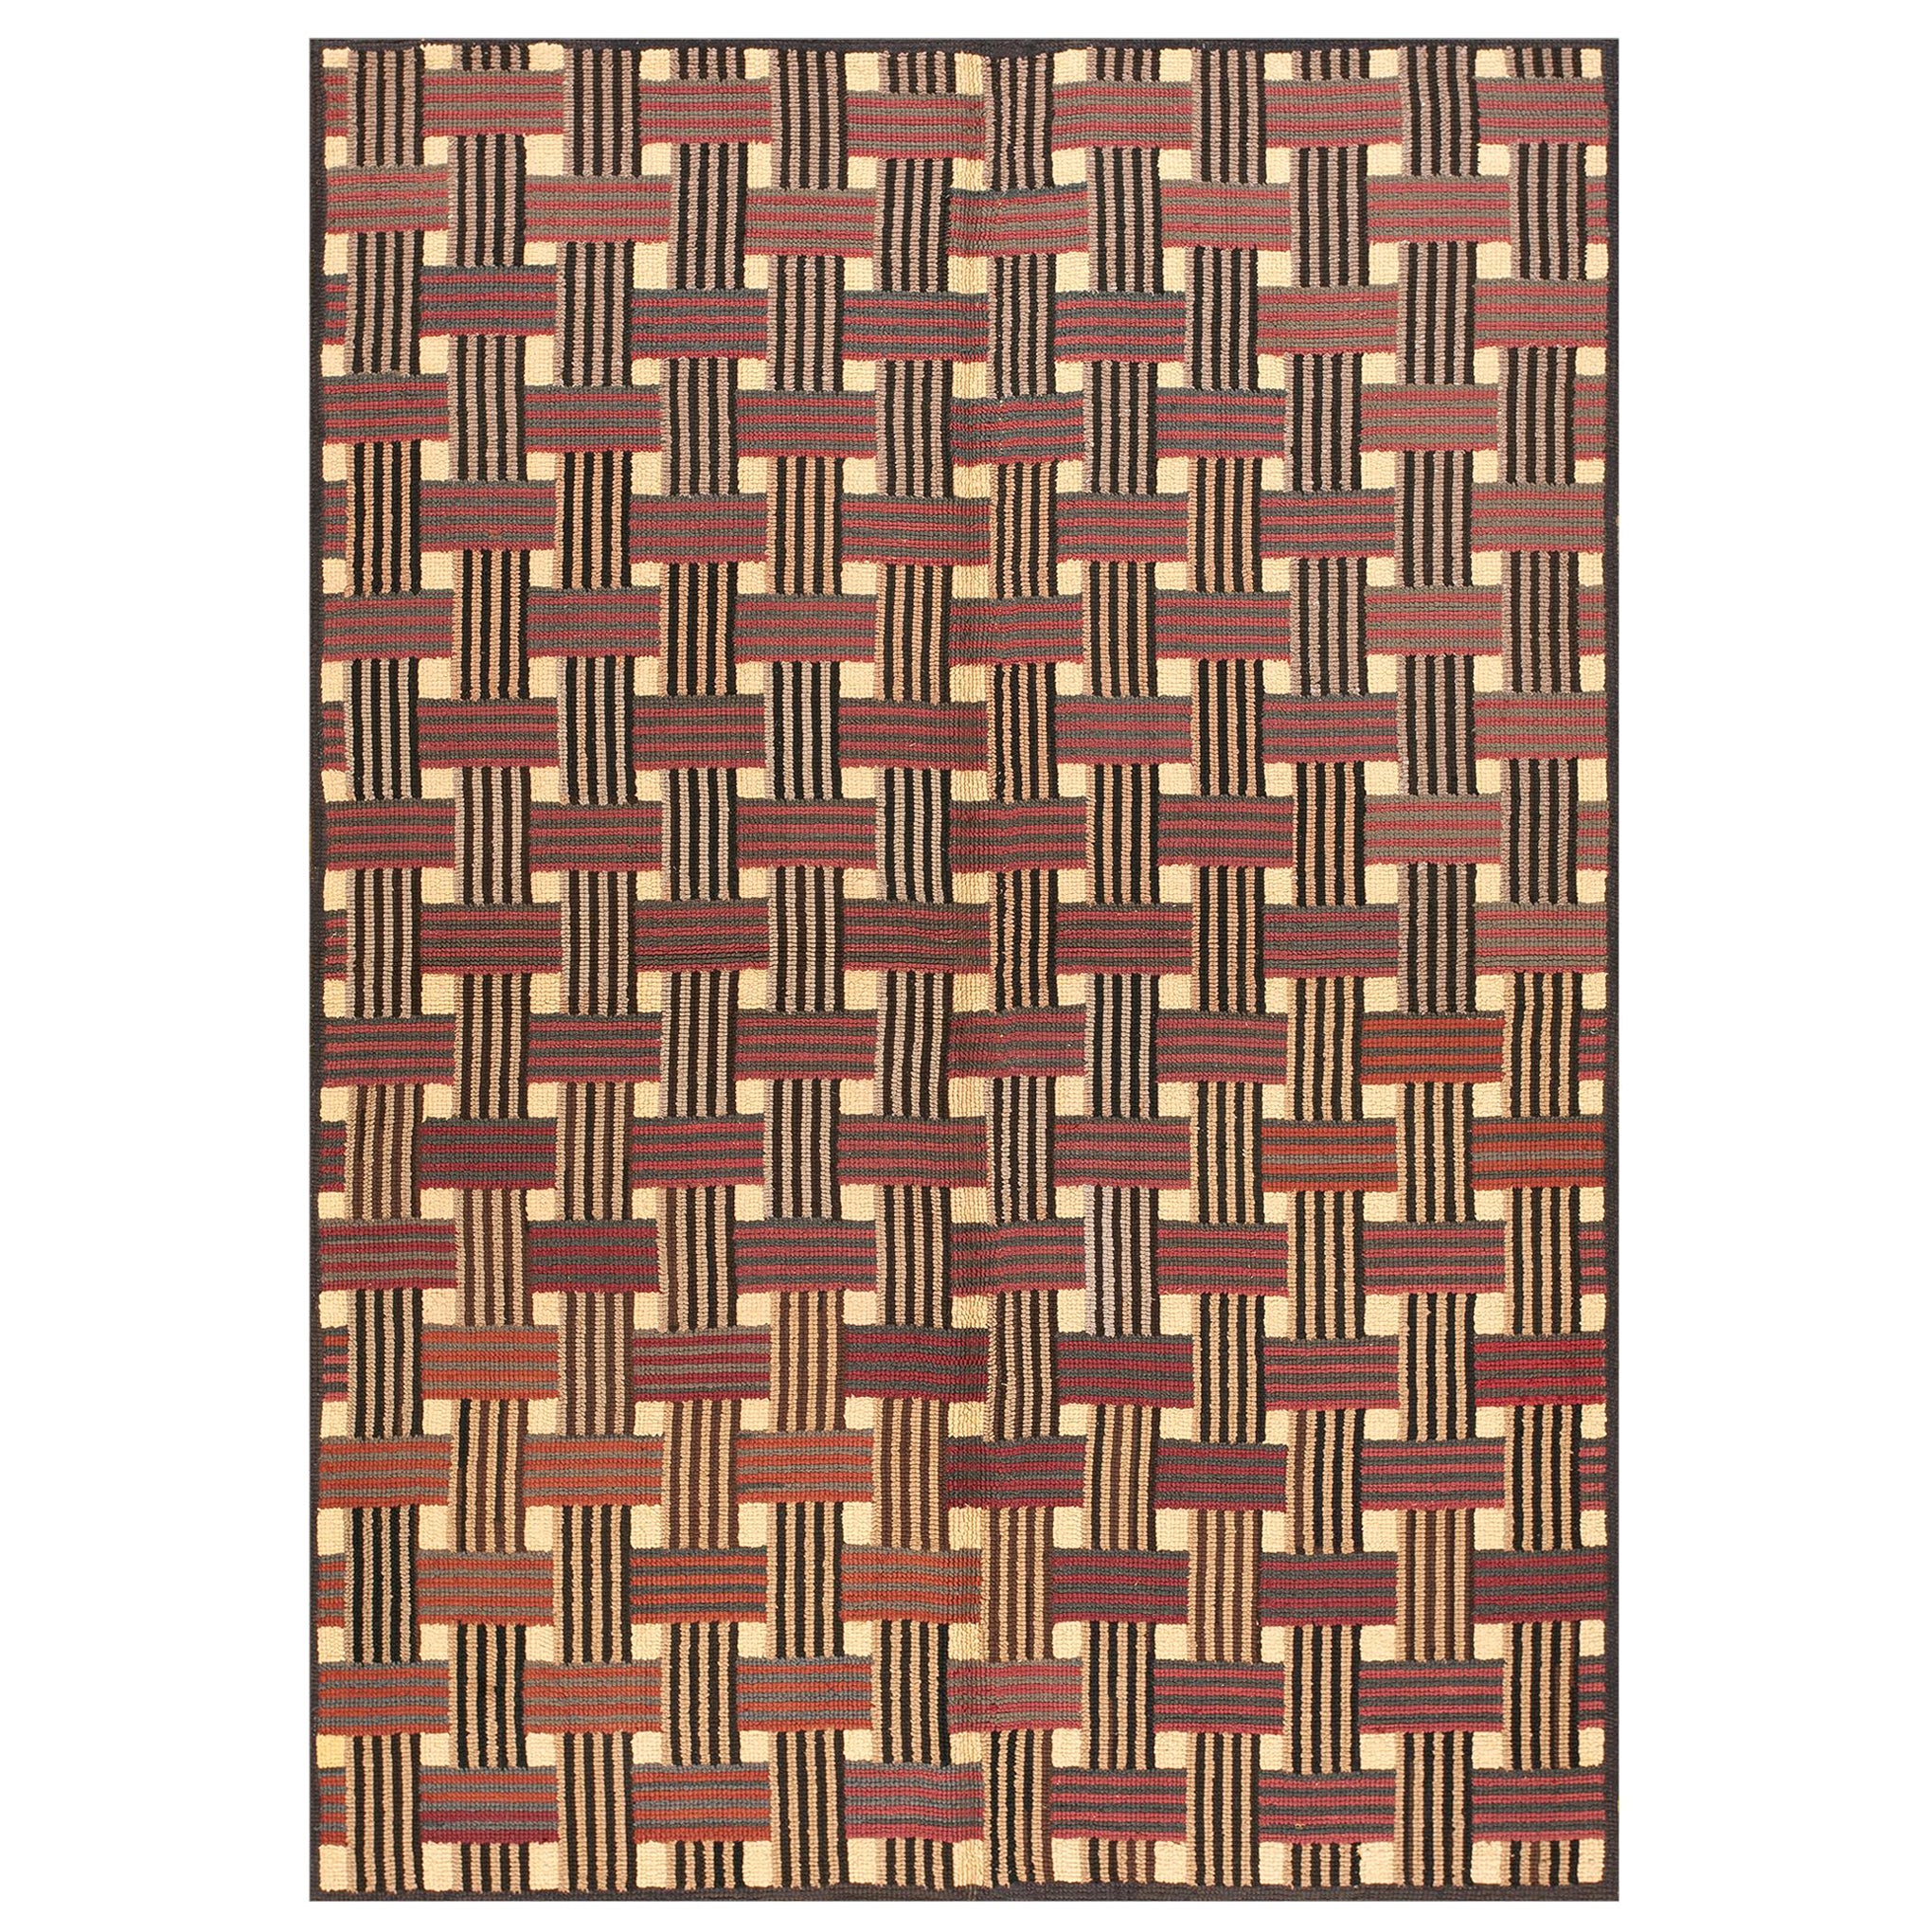 Mid 20th Century American Hooked Rug ( 6'2" x 8'8" - 188 x 265 cm ) For Sale